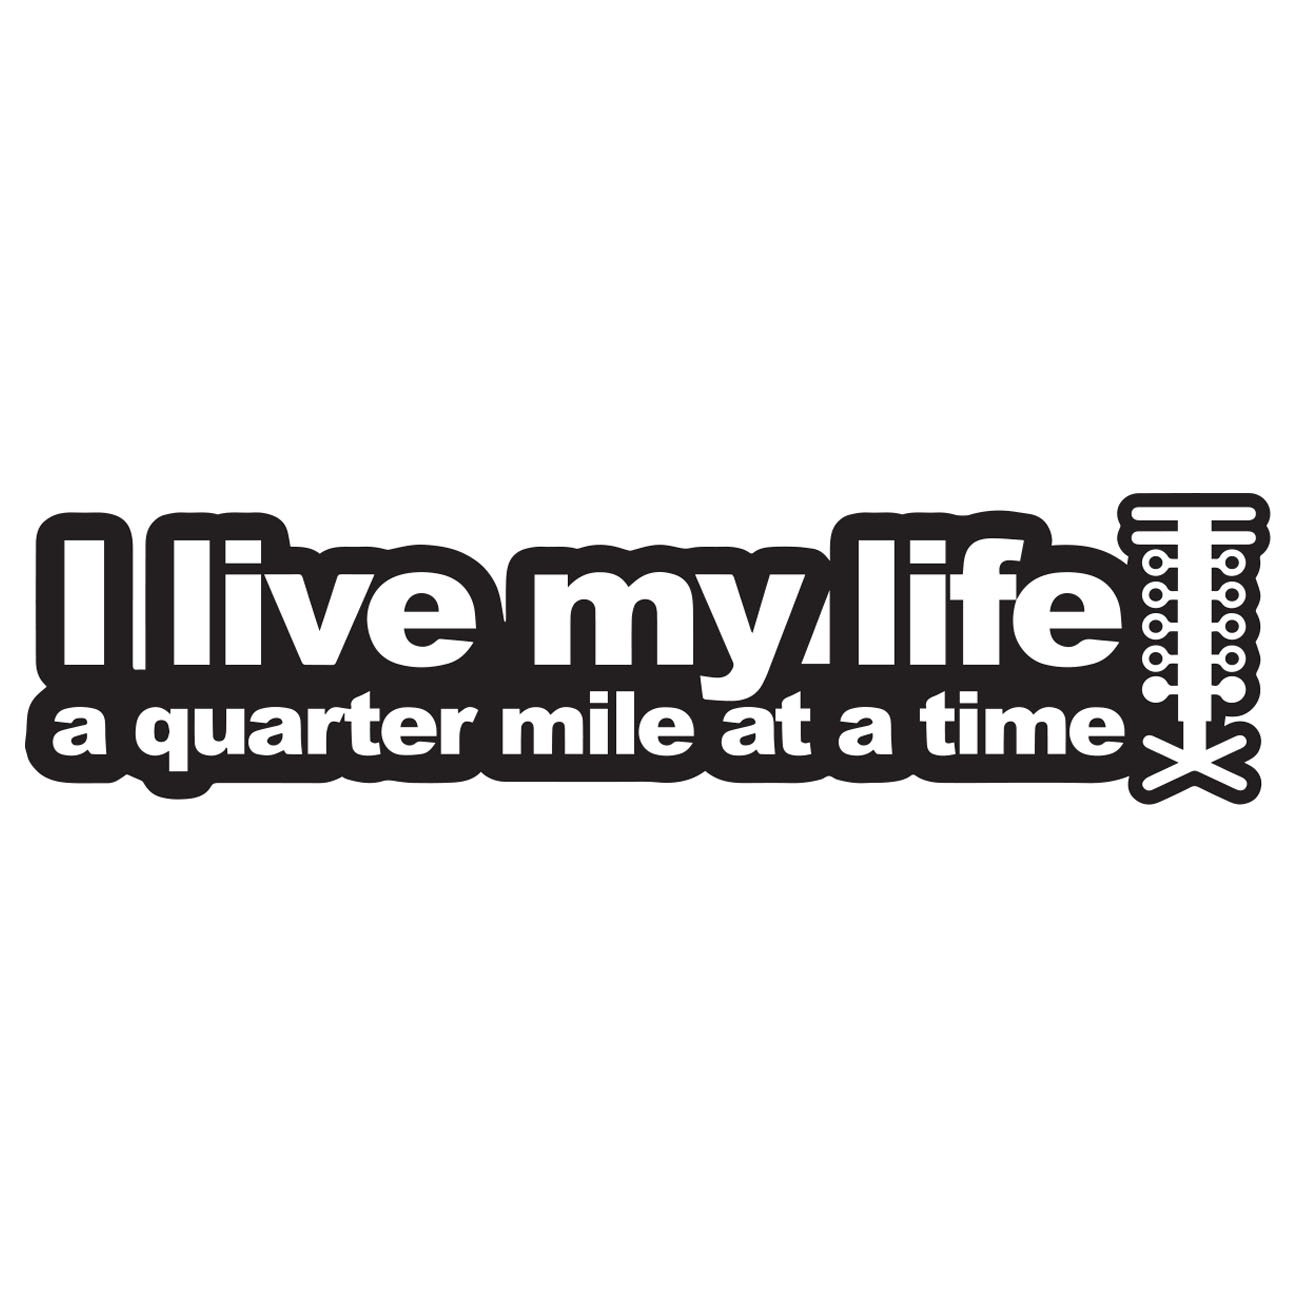 I live my life - A quarter mile at a time